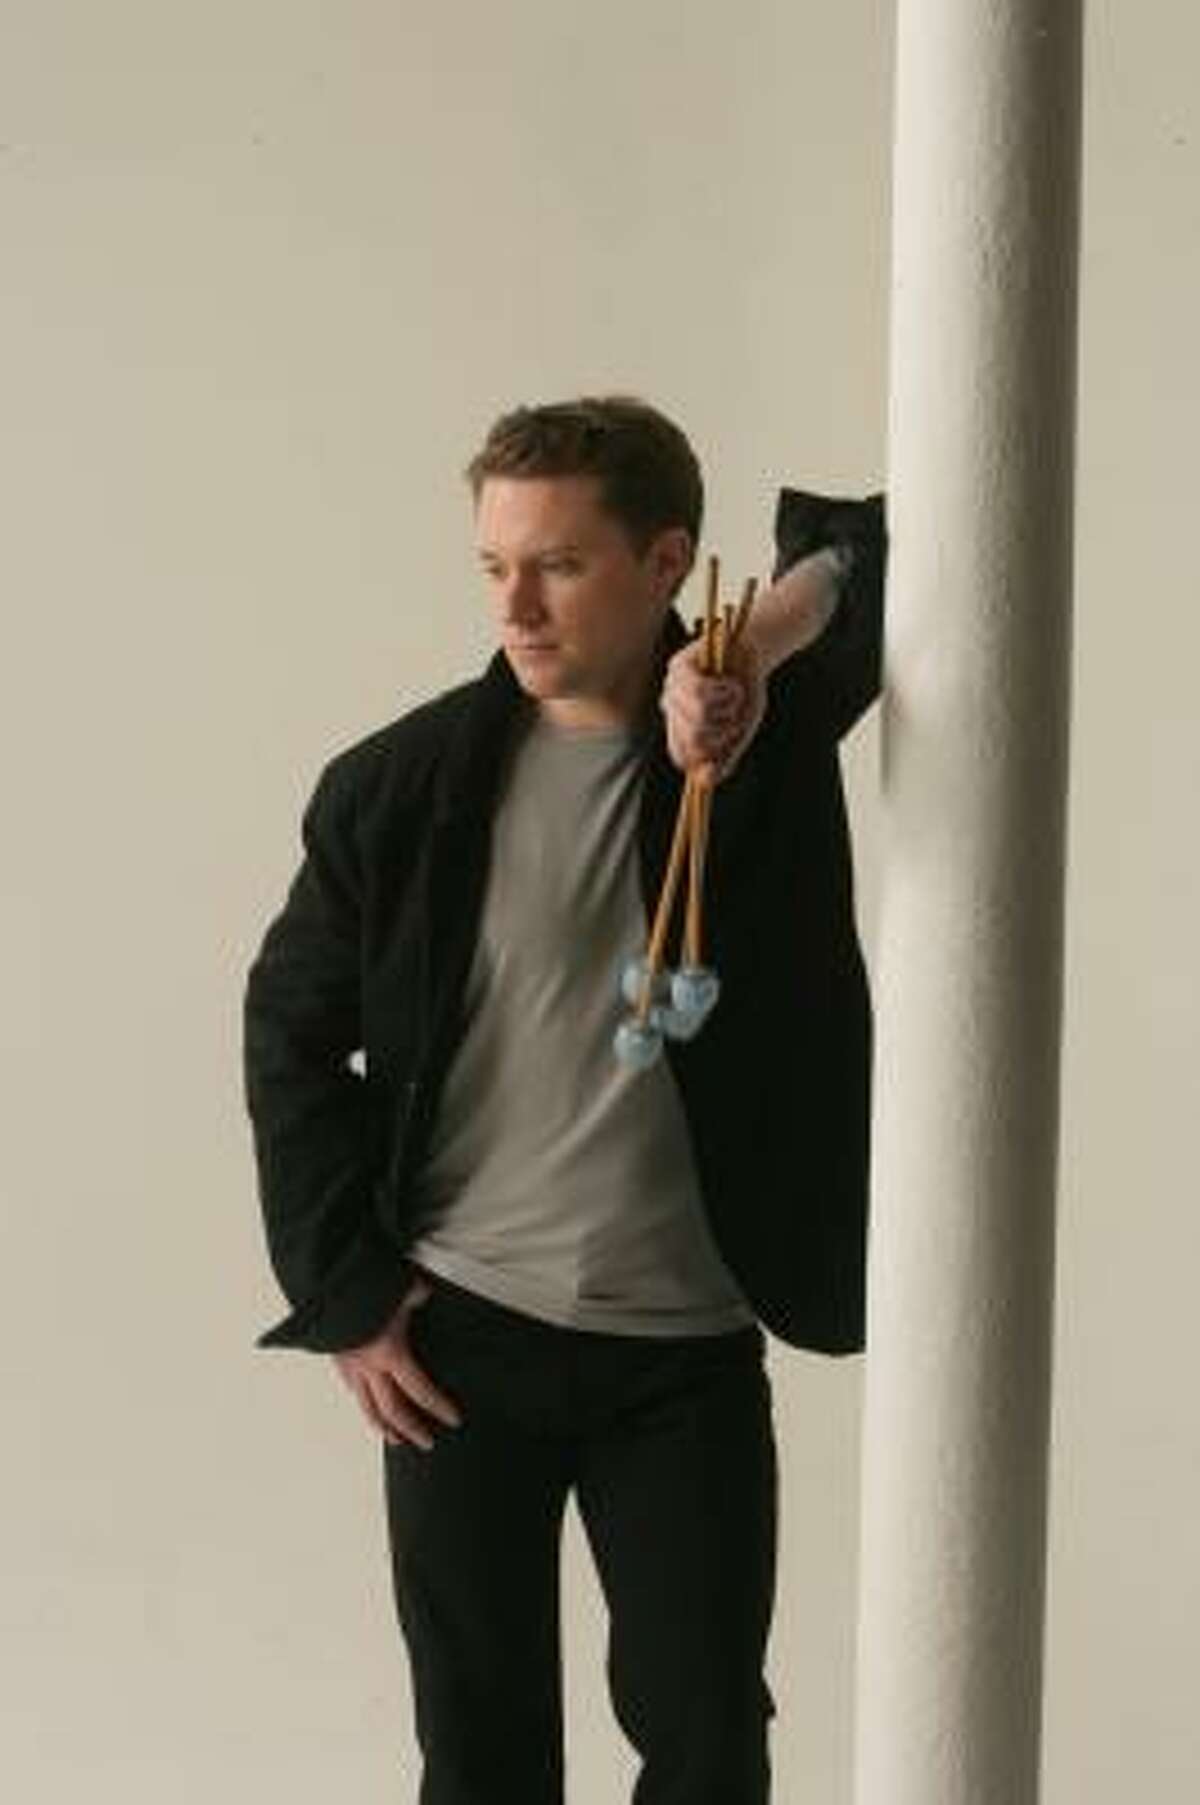 Percussionist Colin Currie takes his instruments center stage for his Houston Symphony debut.